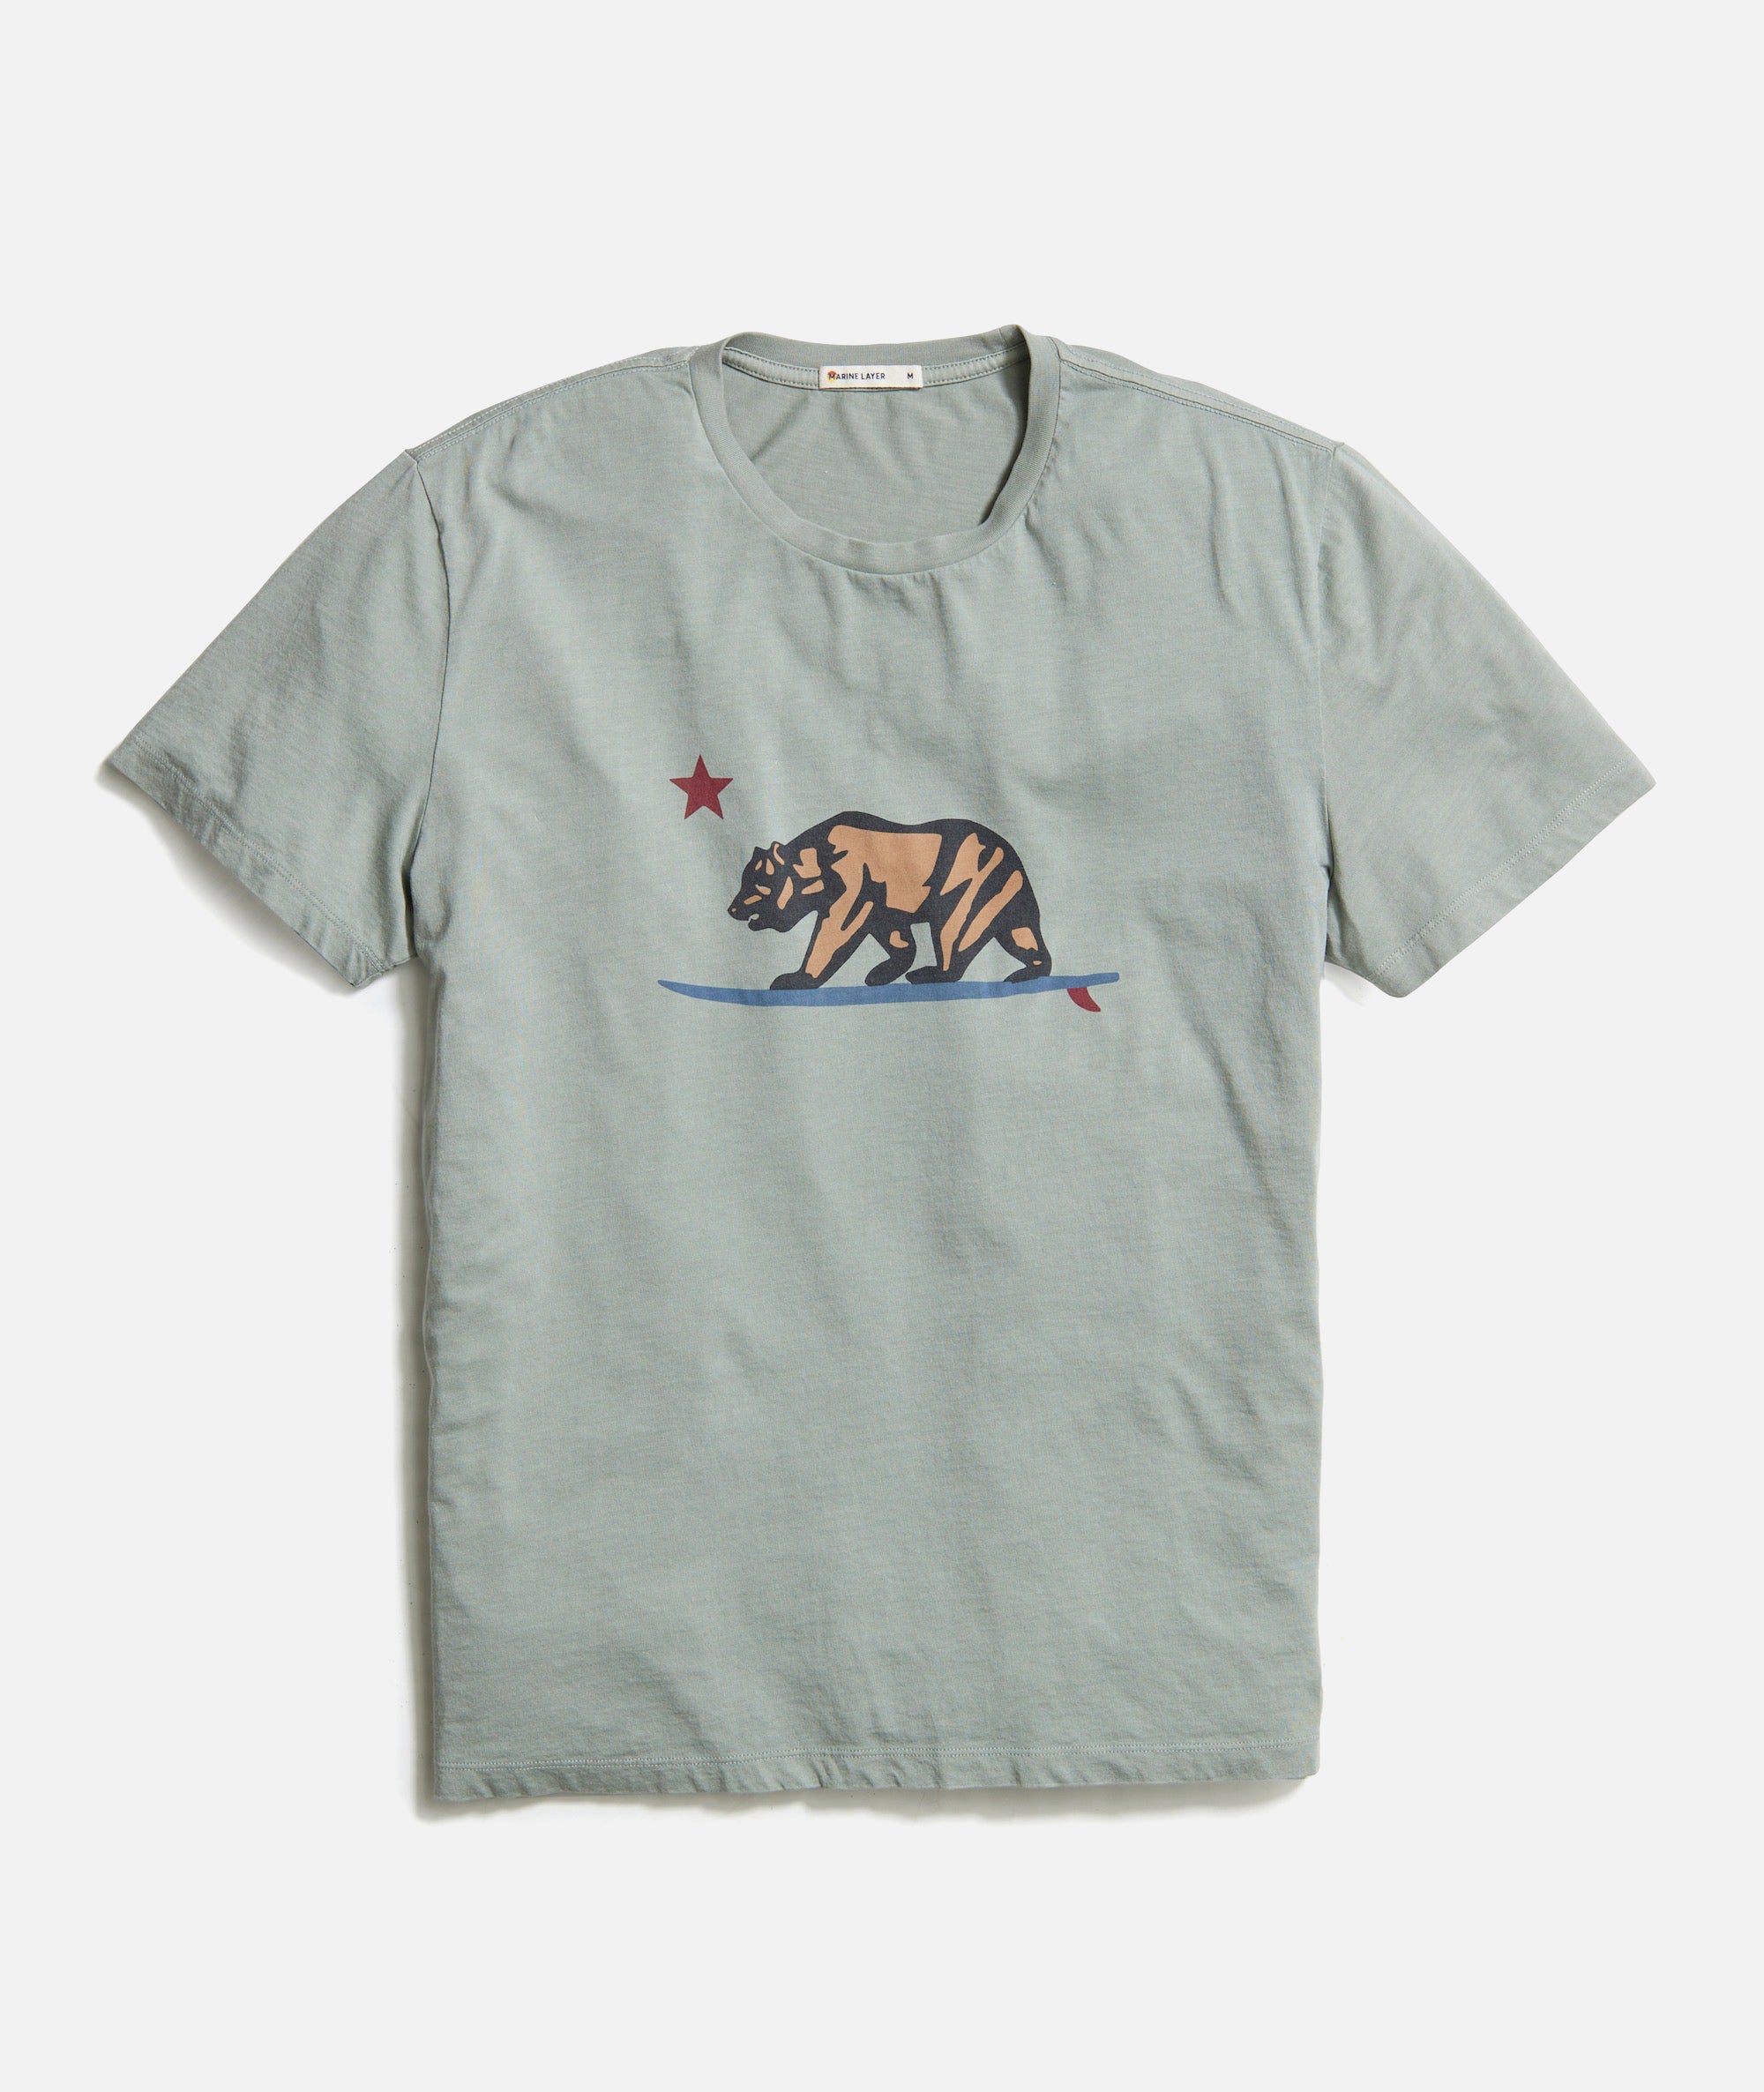 – Off Guys 3 20% for Marine Layer Tees